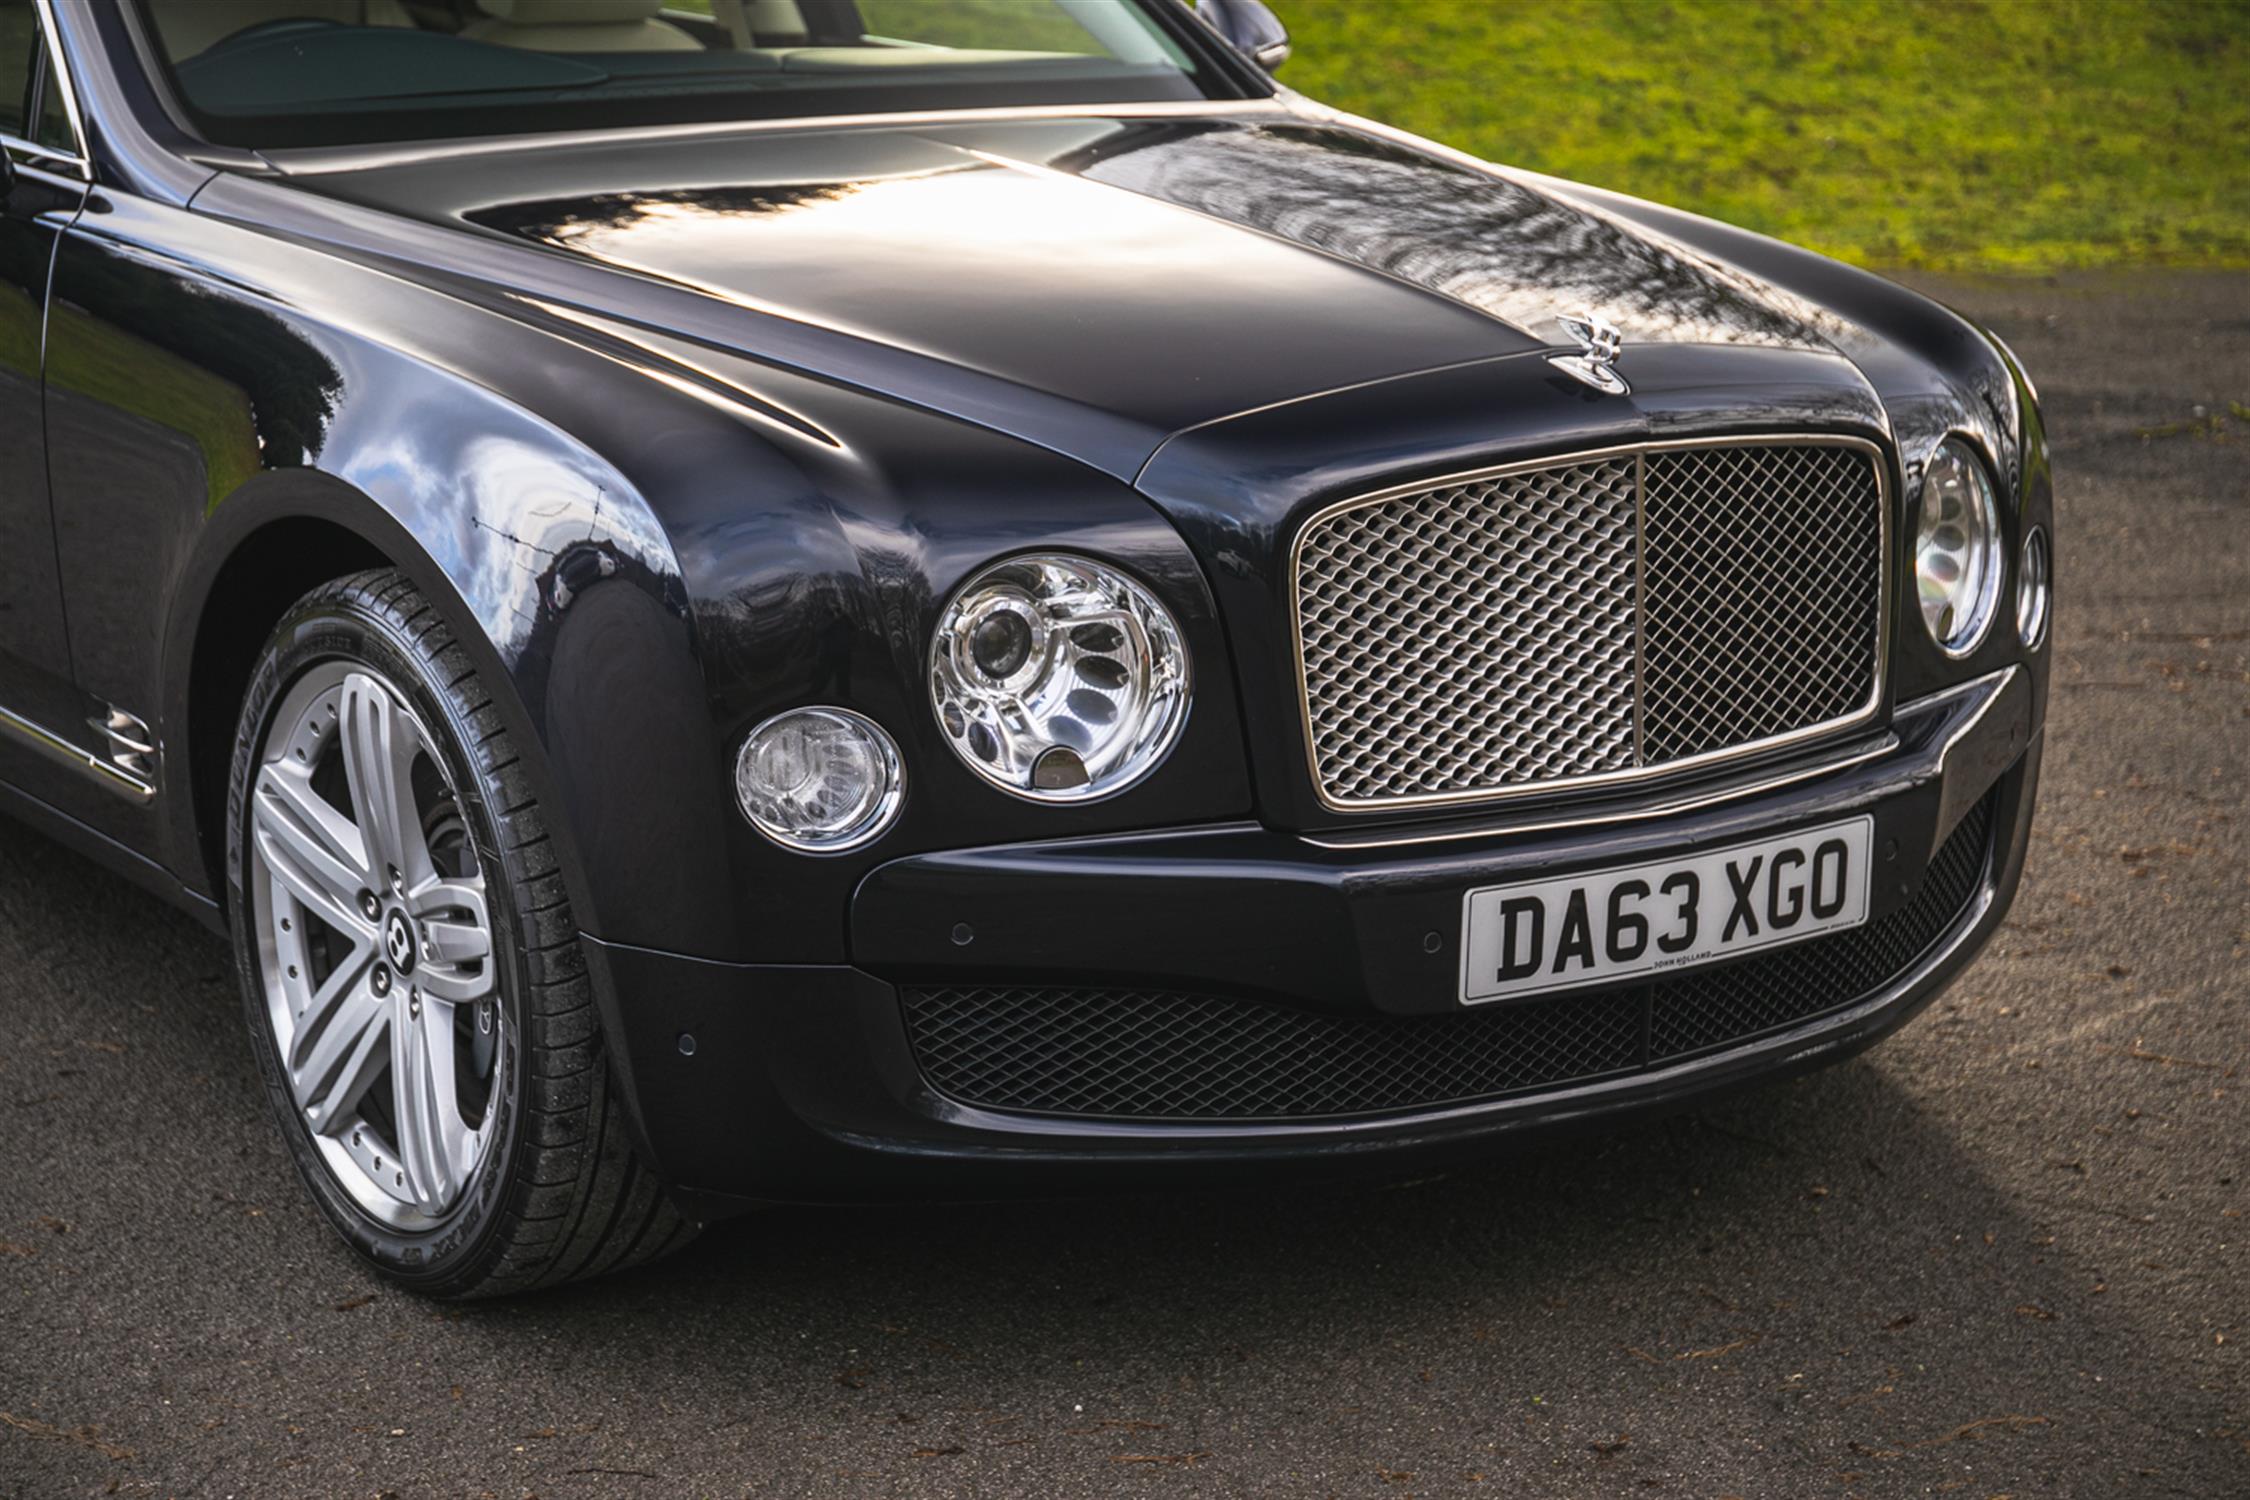 2013 Bentley Mulsanne - Former Bentley Special Ops with Royal Household Duties - Image 8 of 10